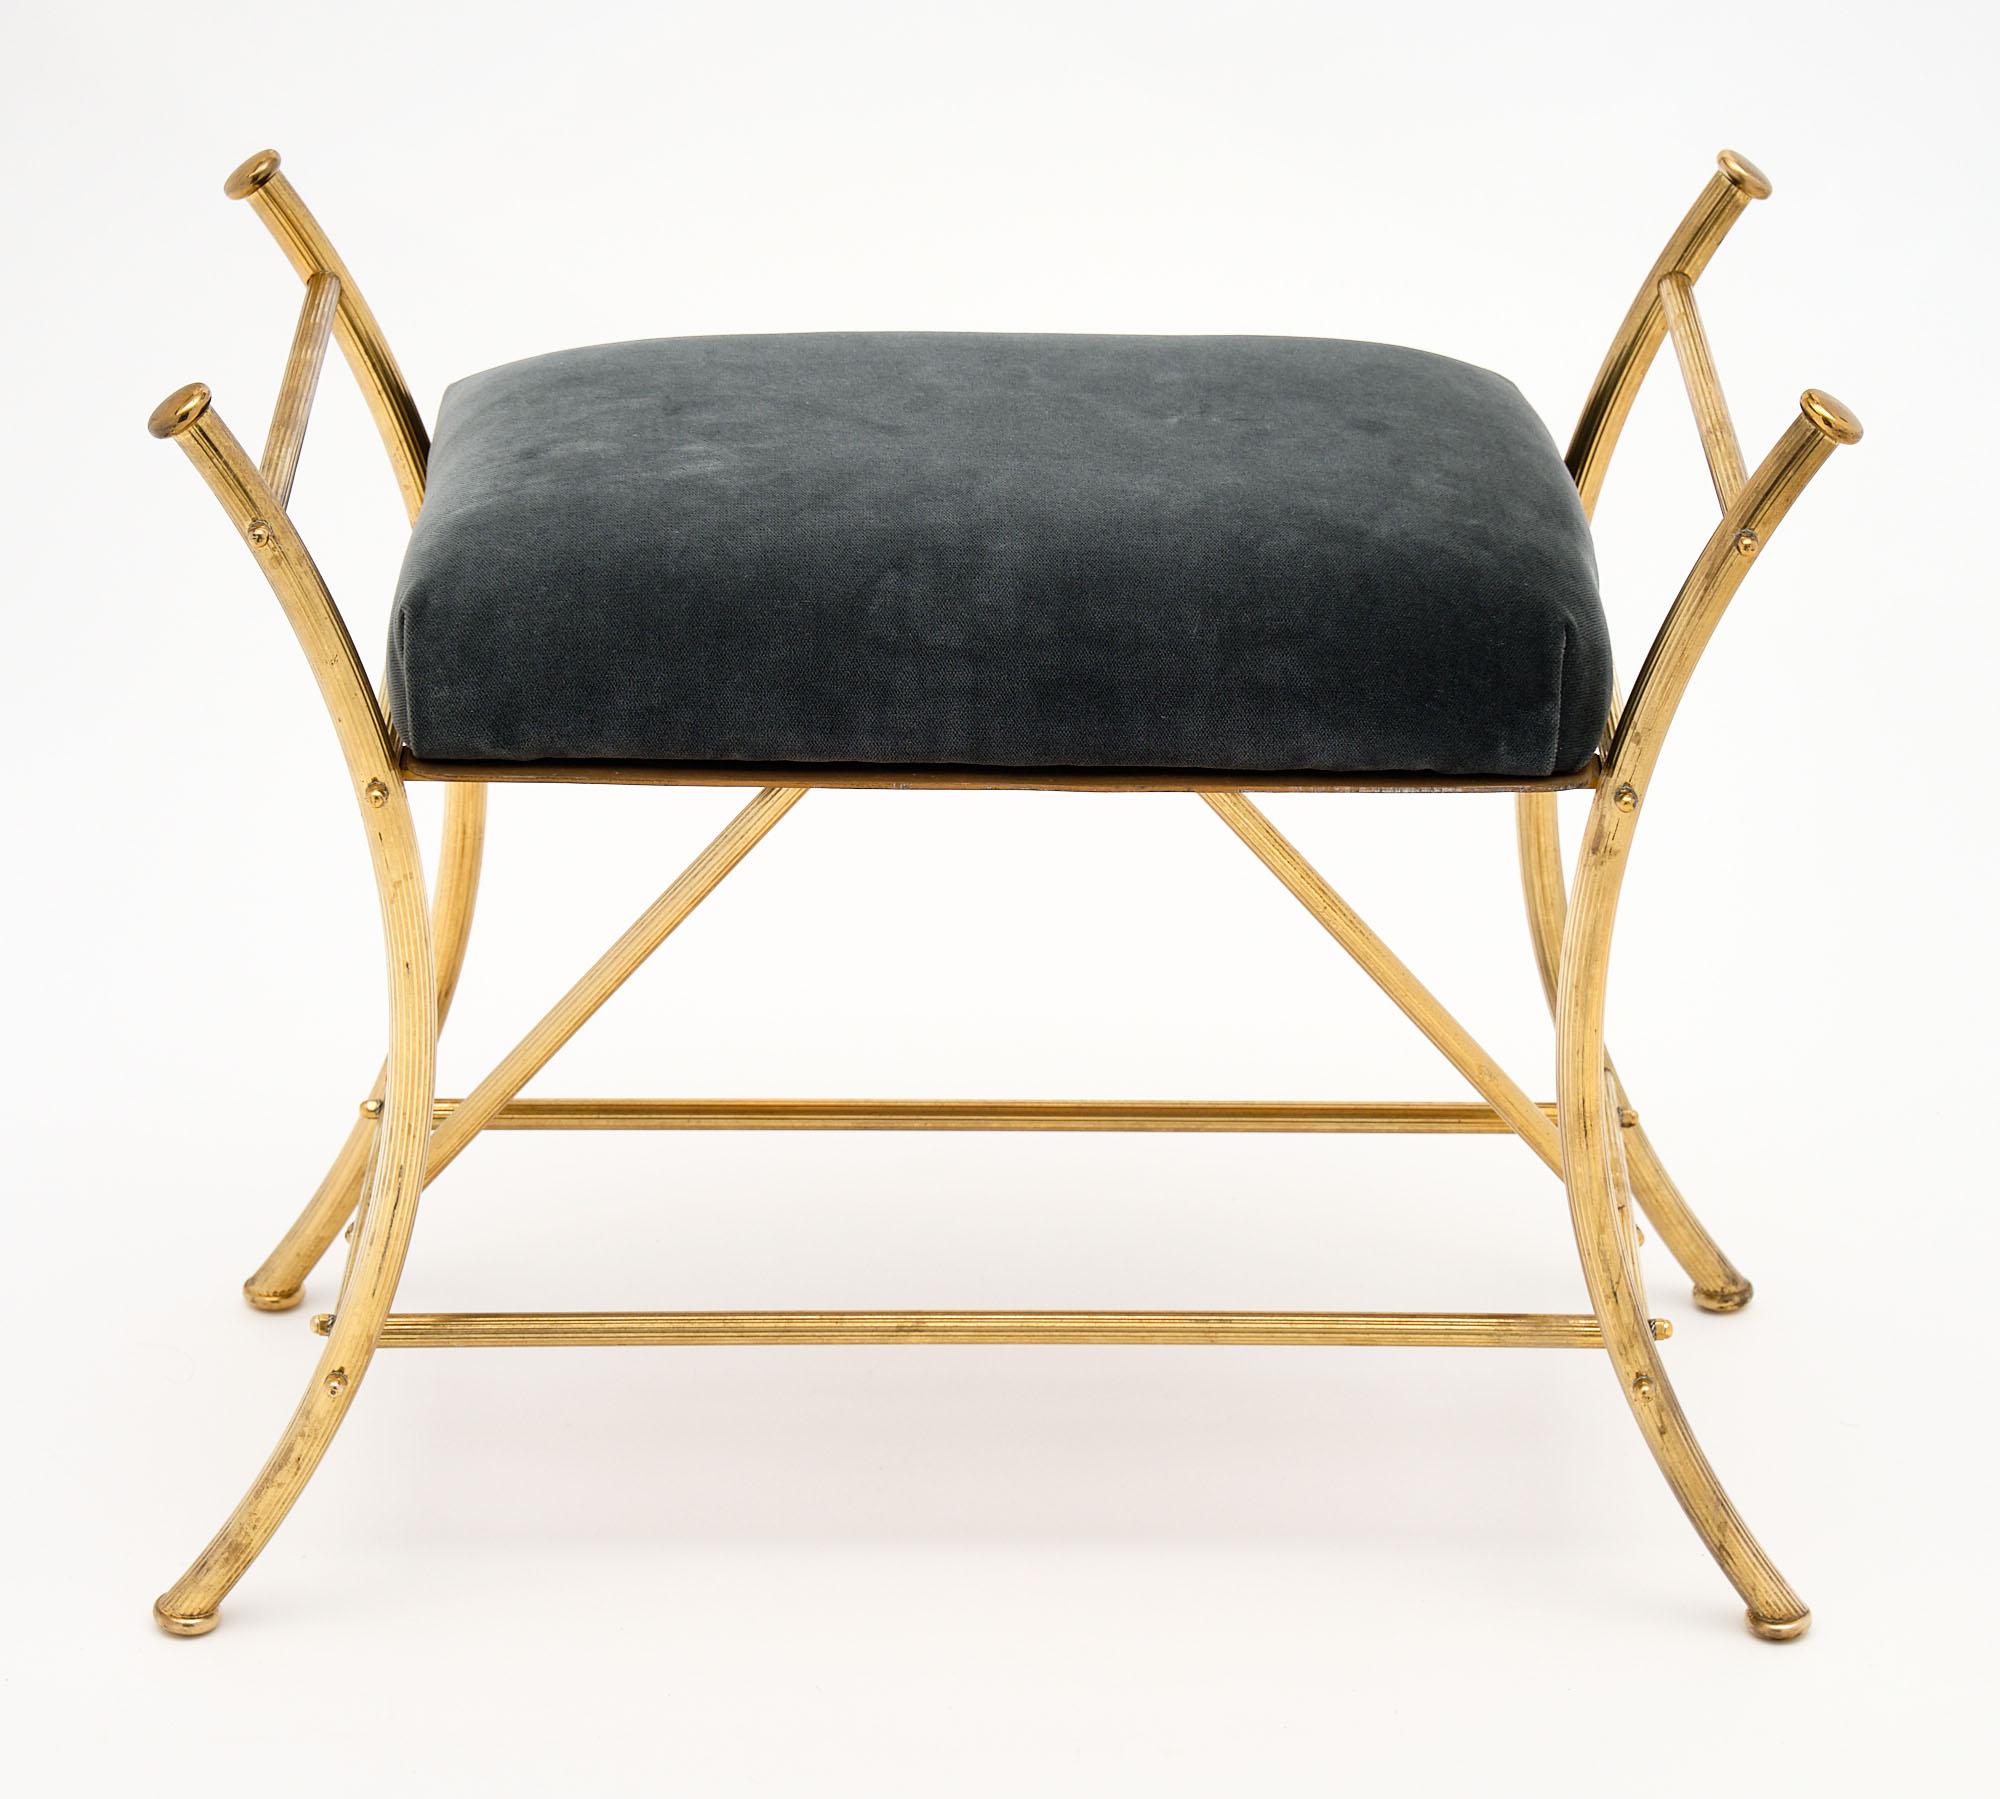 French Art Deco period brass stool with a solid gilded ridged brass frame and strong craftsmanship. The cushion has been newly upholstered in a dark gray-blue velvet blend.